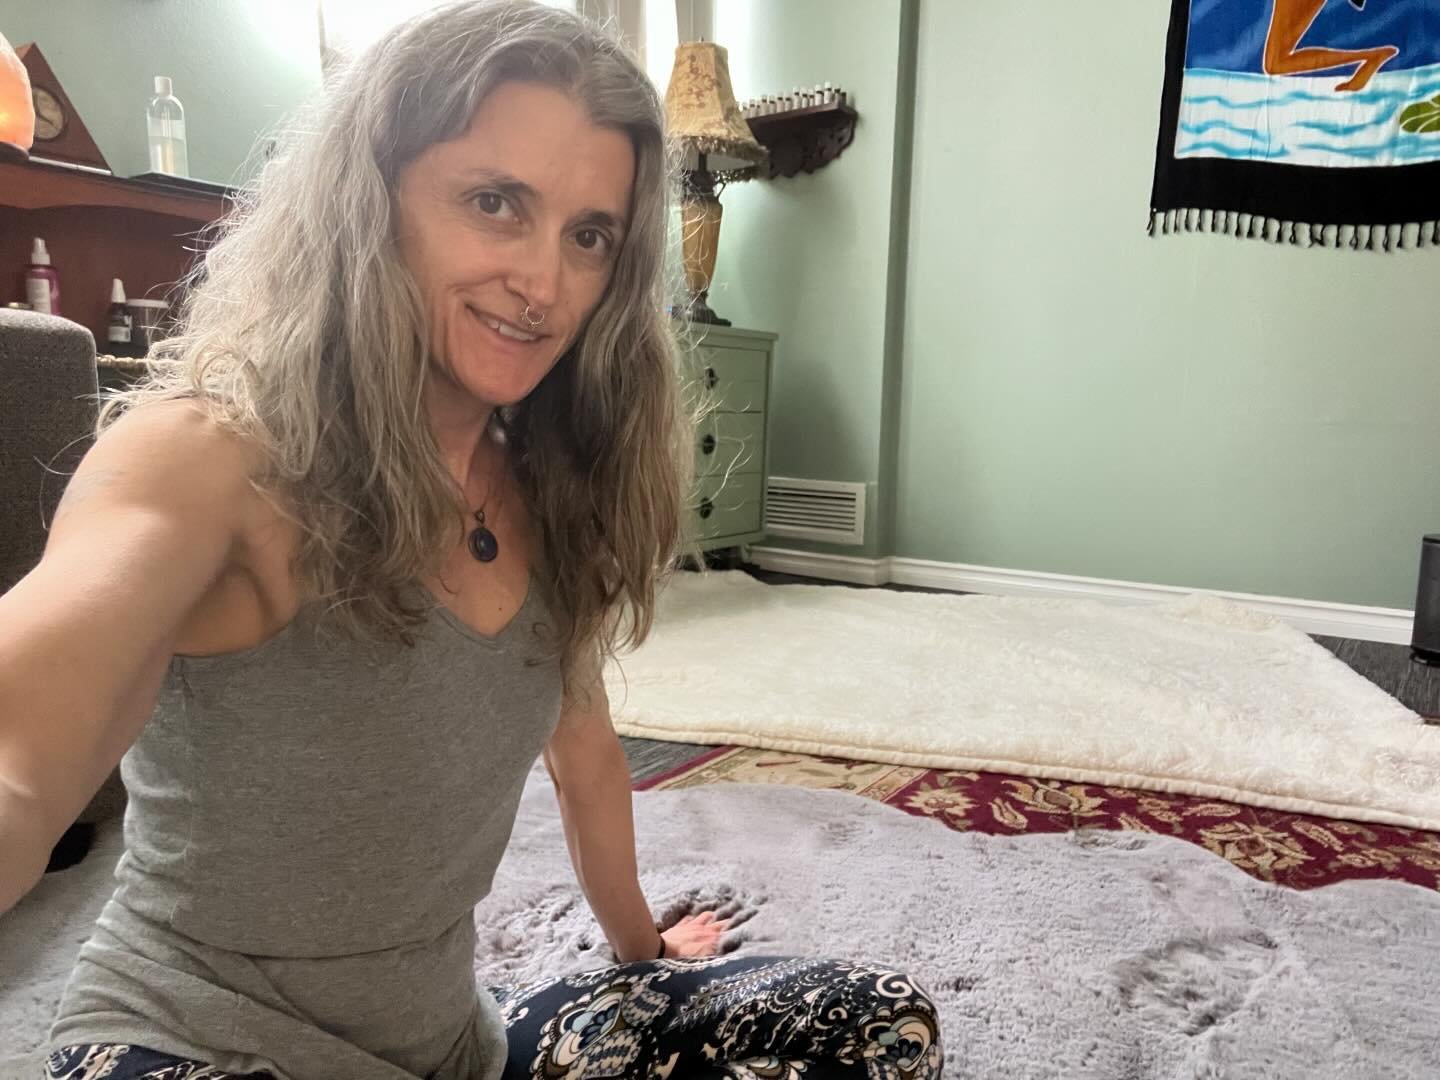 Did you know that I offer private sessions? 

We can work on clearing old stories from your body, getting back in touch with your sparkling self, finding movement in embodiment practices, and celebrating the pleasure of being uniquely you! 

If this 